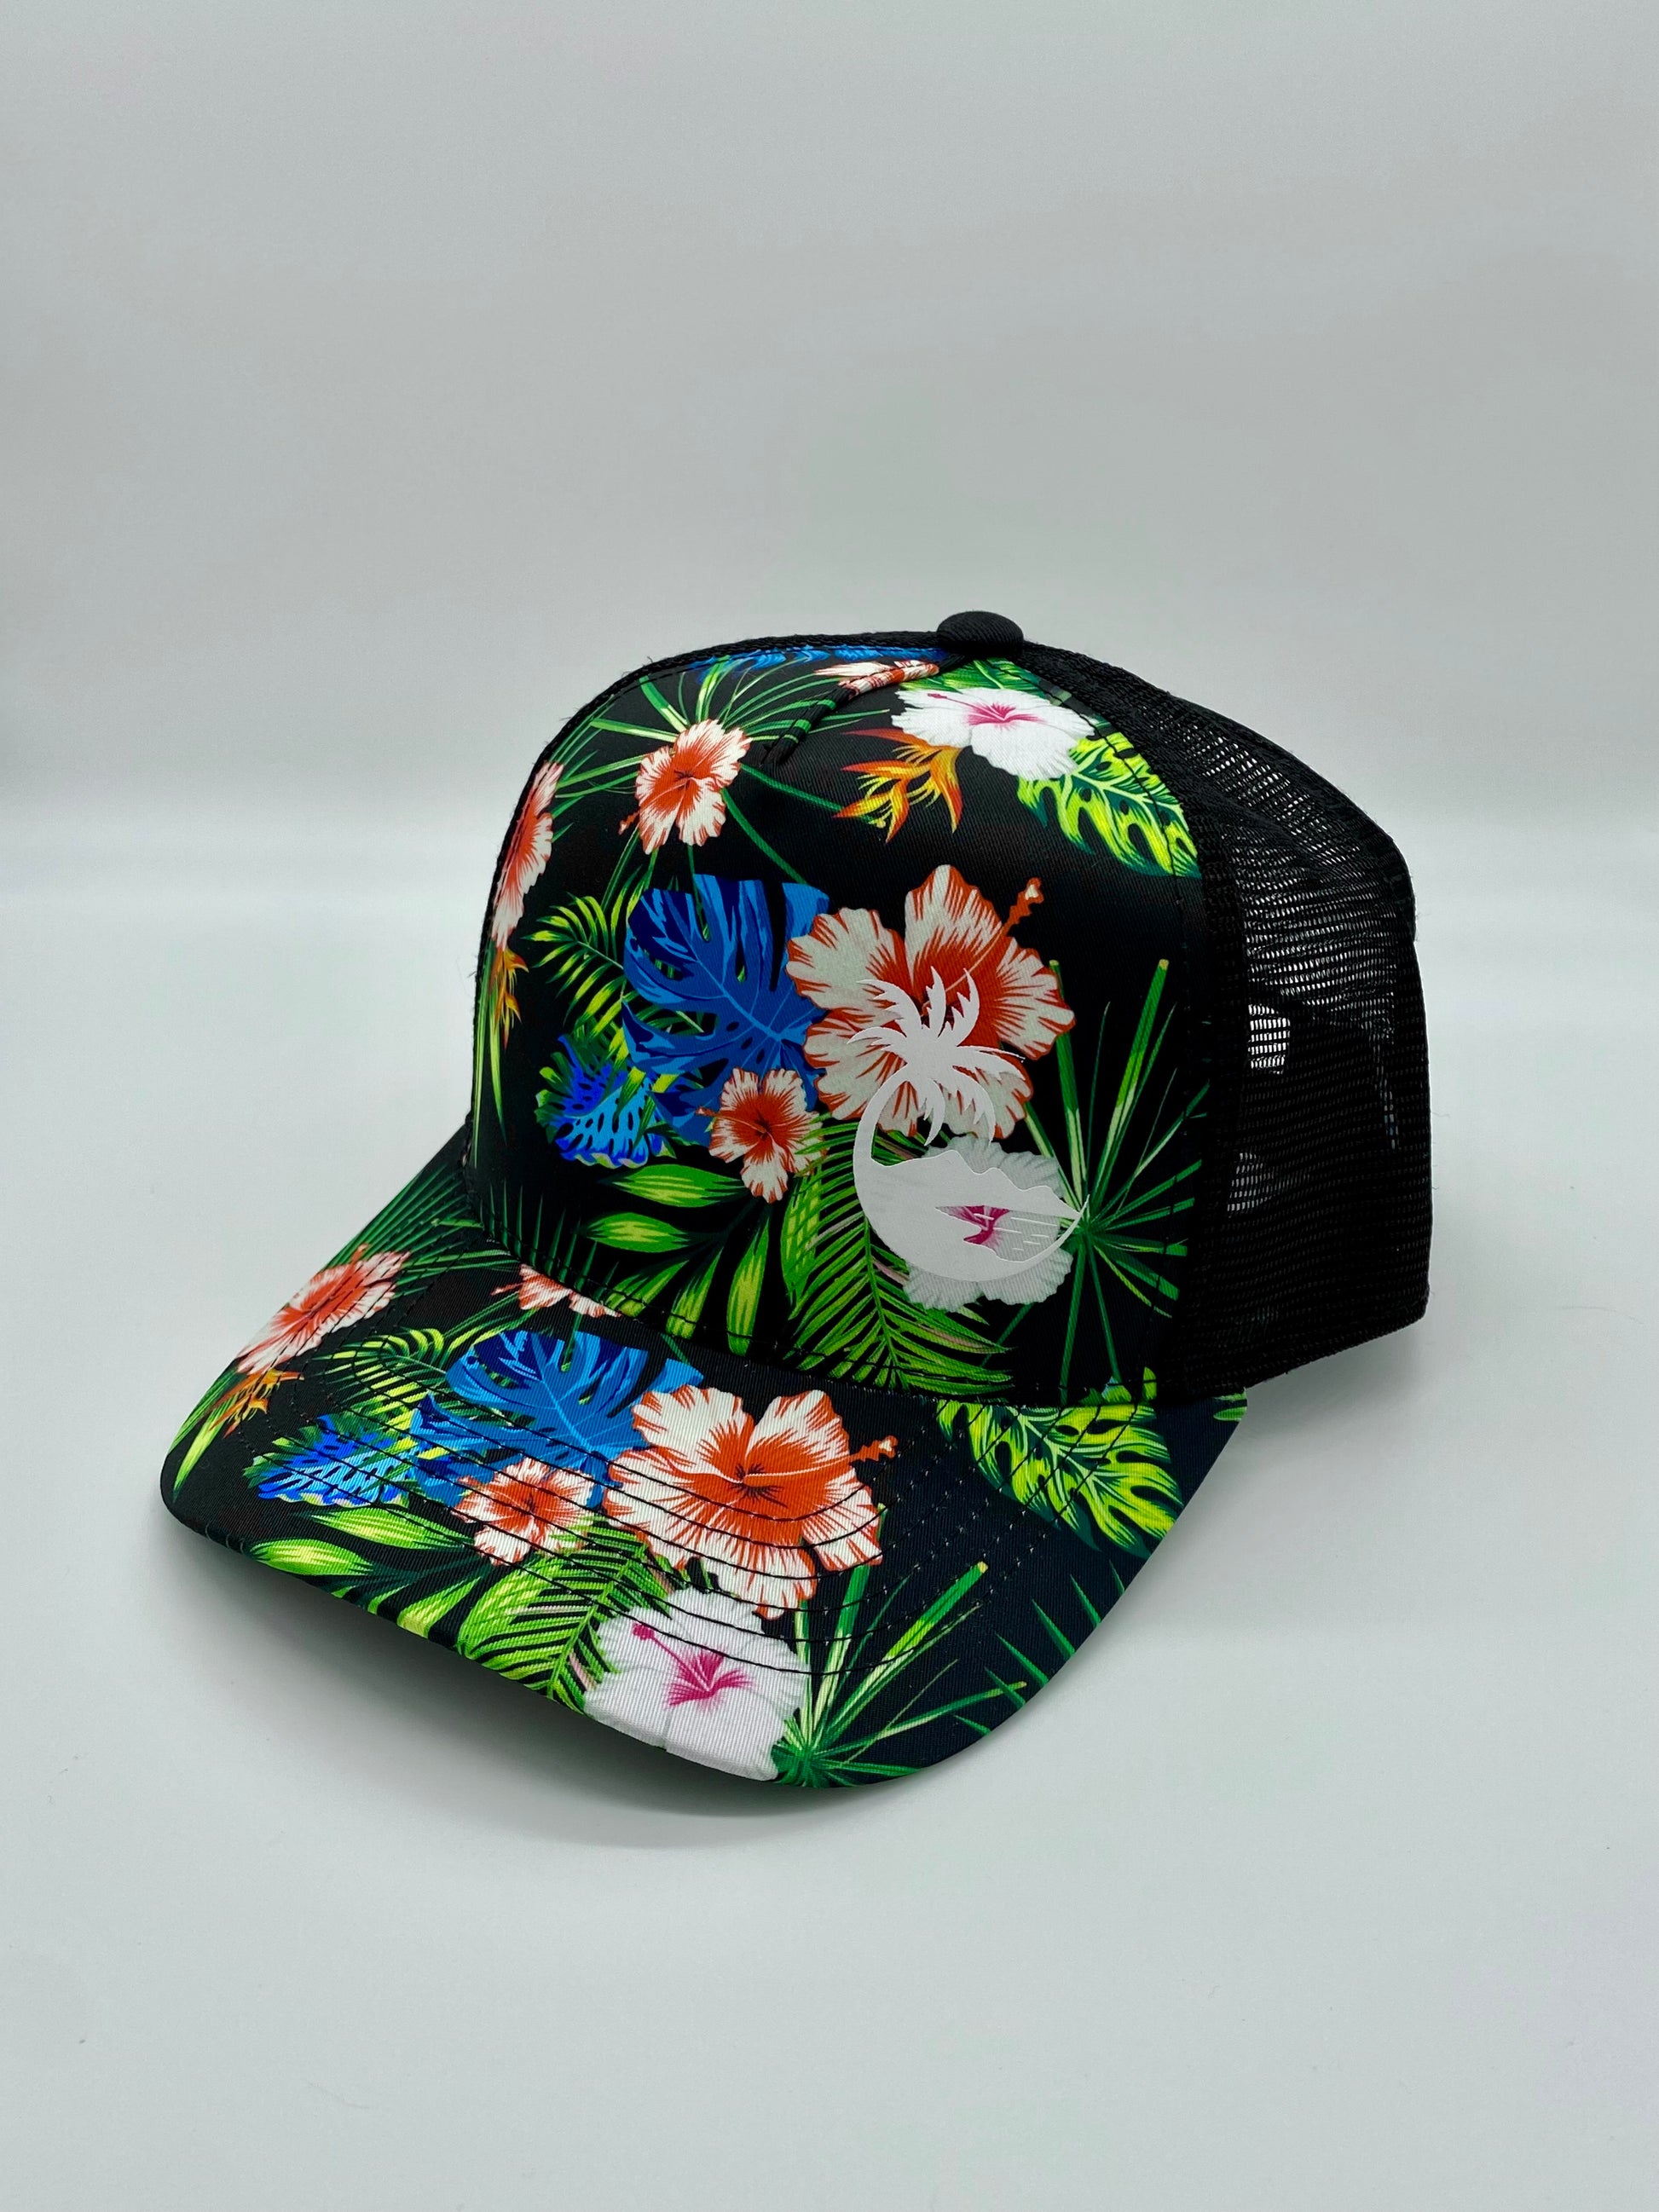 5 Panel Floral Hat, Brown Suede at  Men's Clothing store